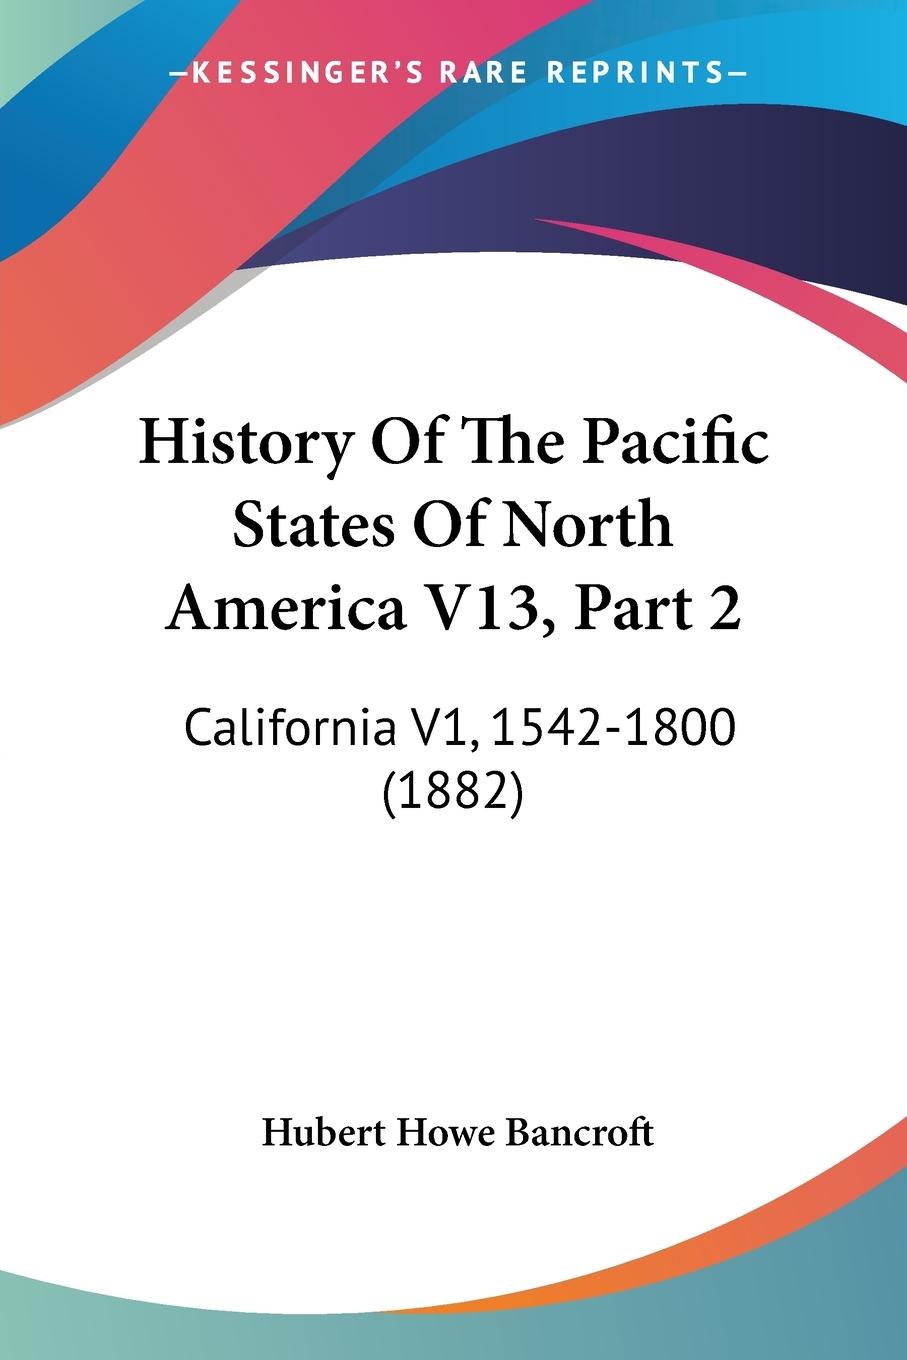 History Of The Pacific States Of North America V13, Part 2 - Bancroft, Hubert Howe